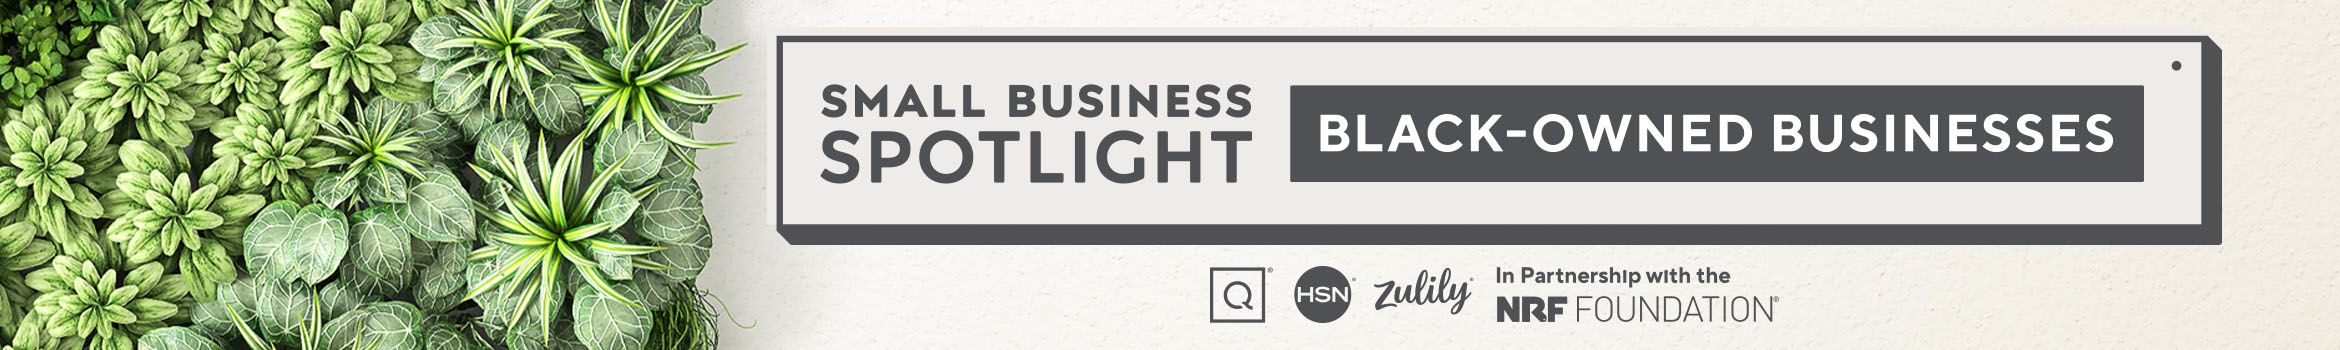 Small Business Spotlight.  Black-Owned Businesses.  QVC, HSN, Zulily. In Partnership with the NRF Foundation.